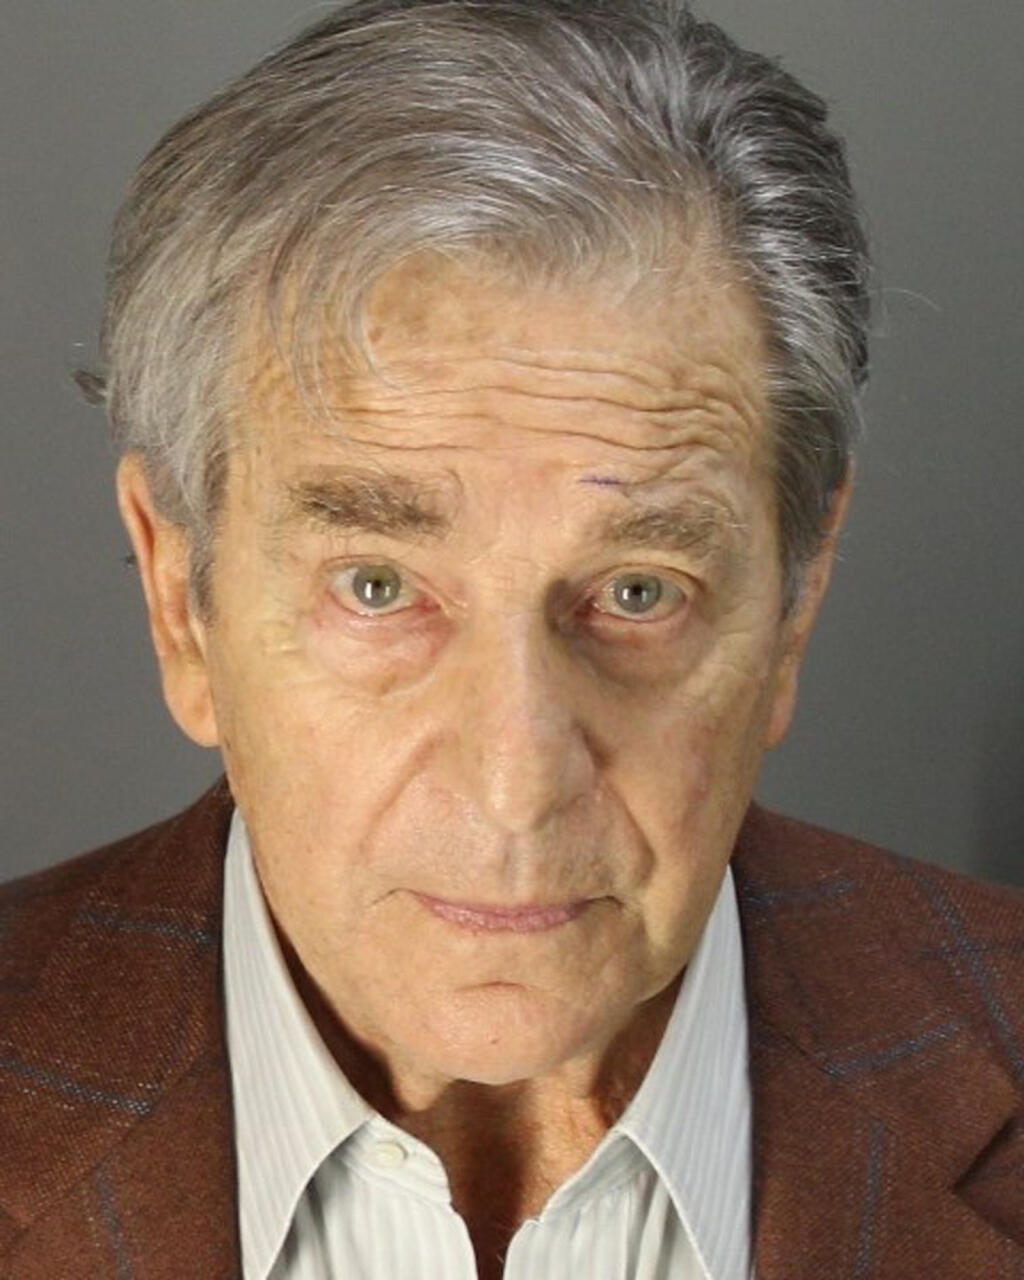 FILE - This booking photo provided by the Napa County Sheriff's Office shows Paul Pelosi on May 29, 2022, following his arrest on suspicion of DUI in Northern California. The husband of U.S. Speaker of the House Nancy Pelosi pleaded not guilty Wednesday, Aug. 3, 2022, to misdemeanor driving under the influence charges related to a May car crash in Northern California wine country. Paul Pelosi did not appear in person at Napa County Superior Court. (Napa County Sheriff's Office via AP, File)